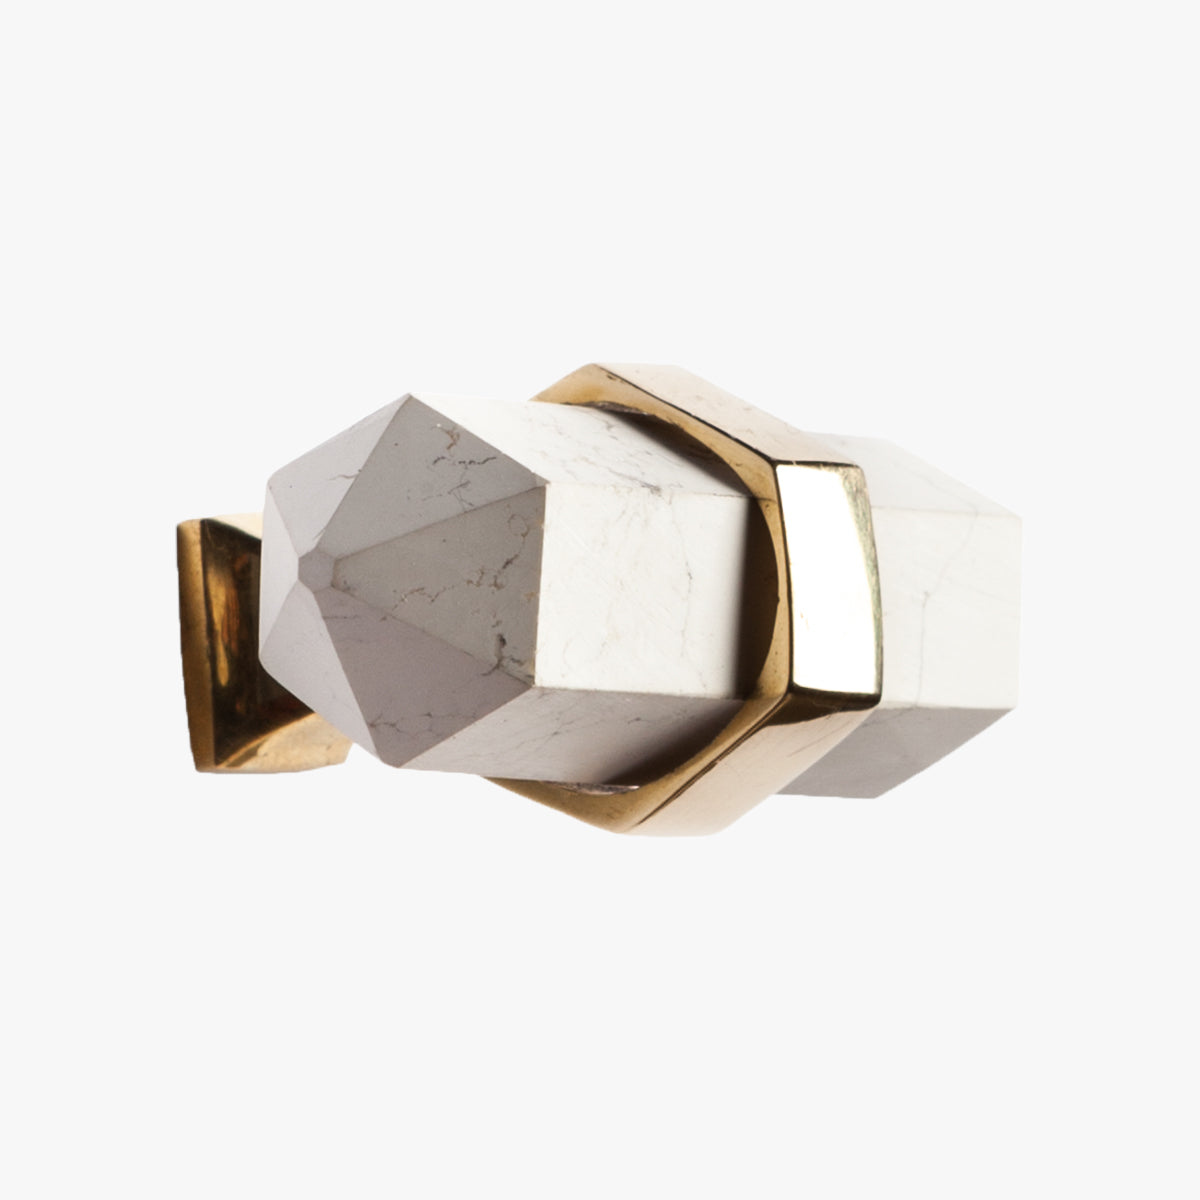 Freya Knob/Pull handmade in howlite marble and polished brass by Matthew Studios